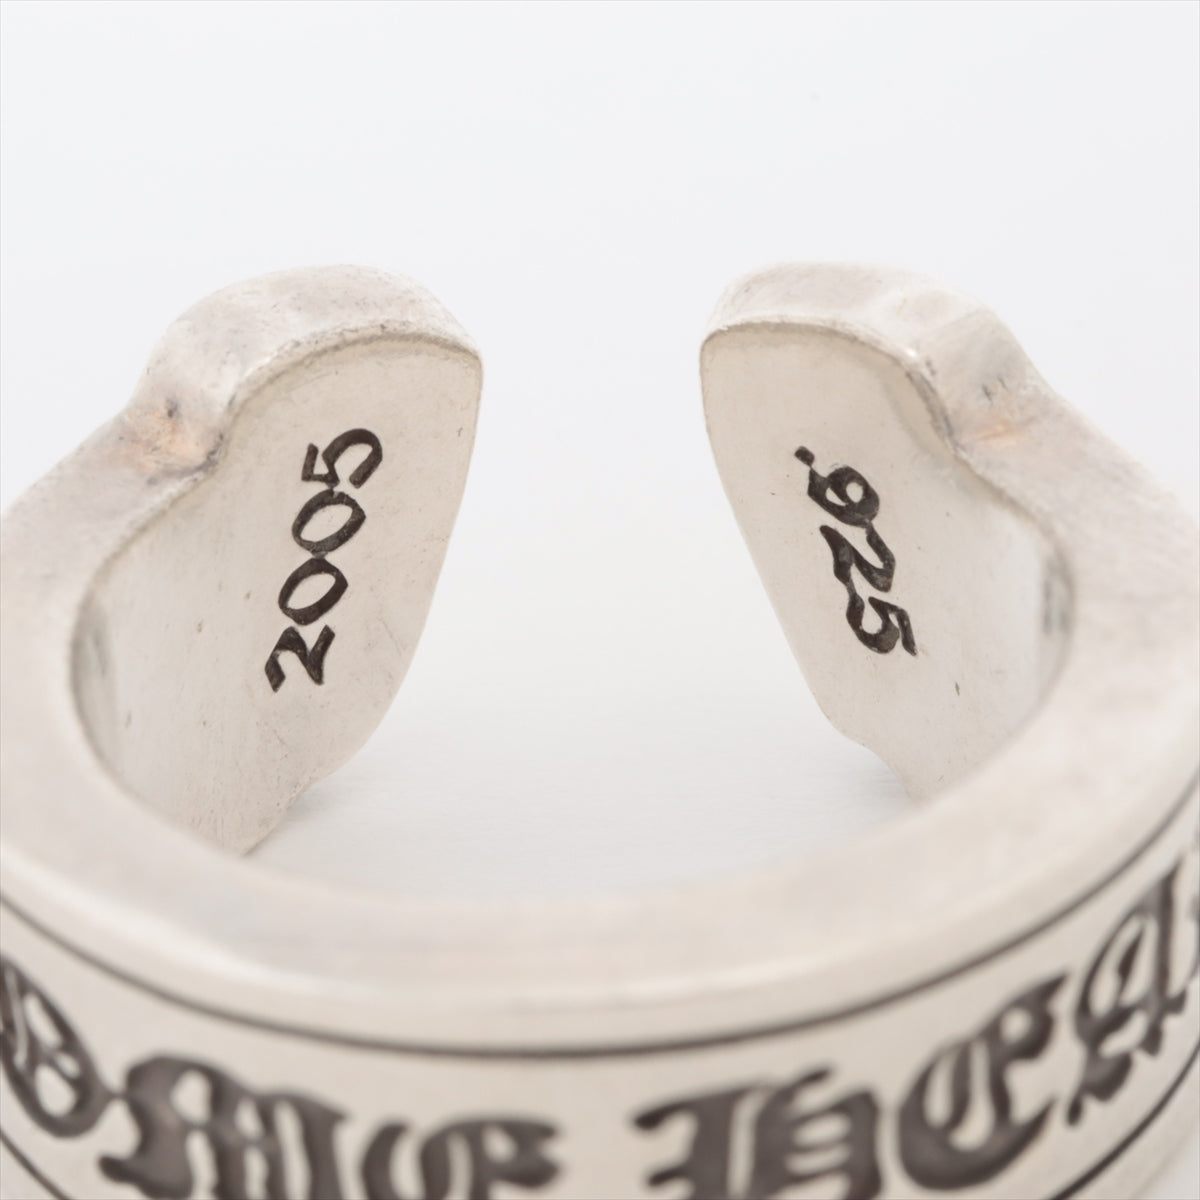 Chrome Hearts large scroll label rings 925 18.5g